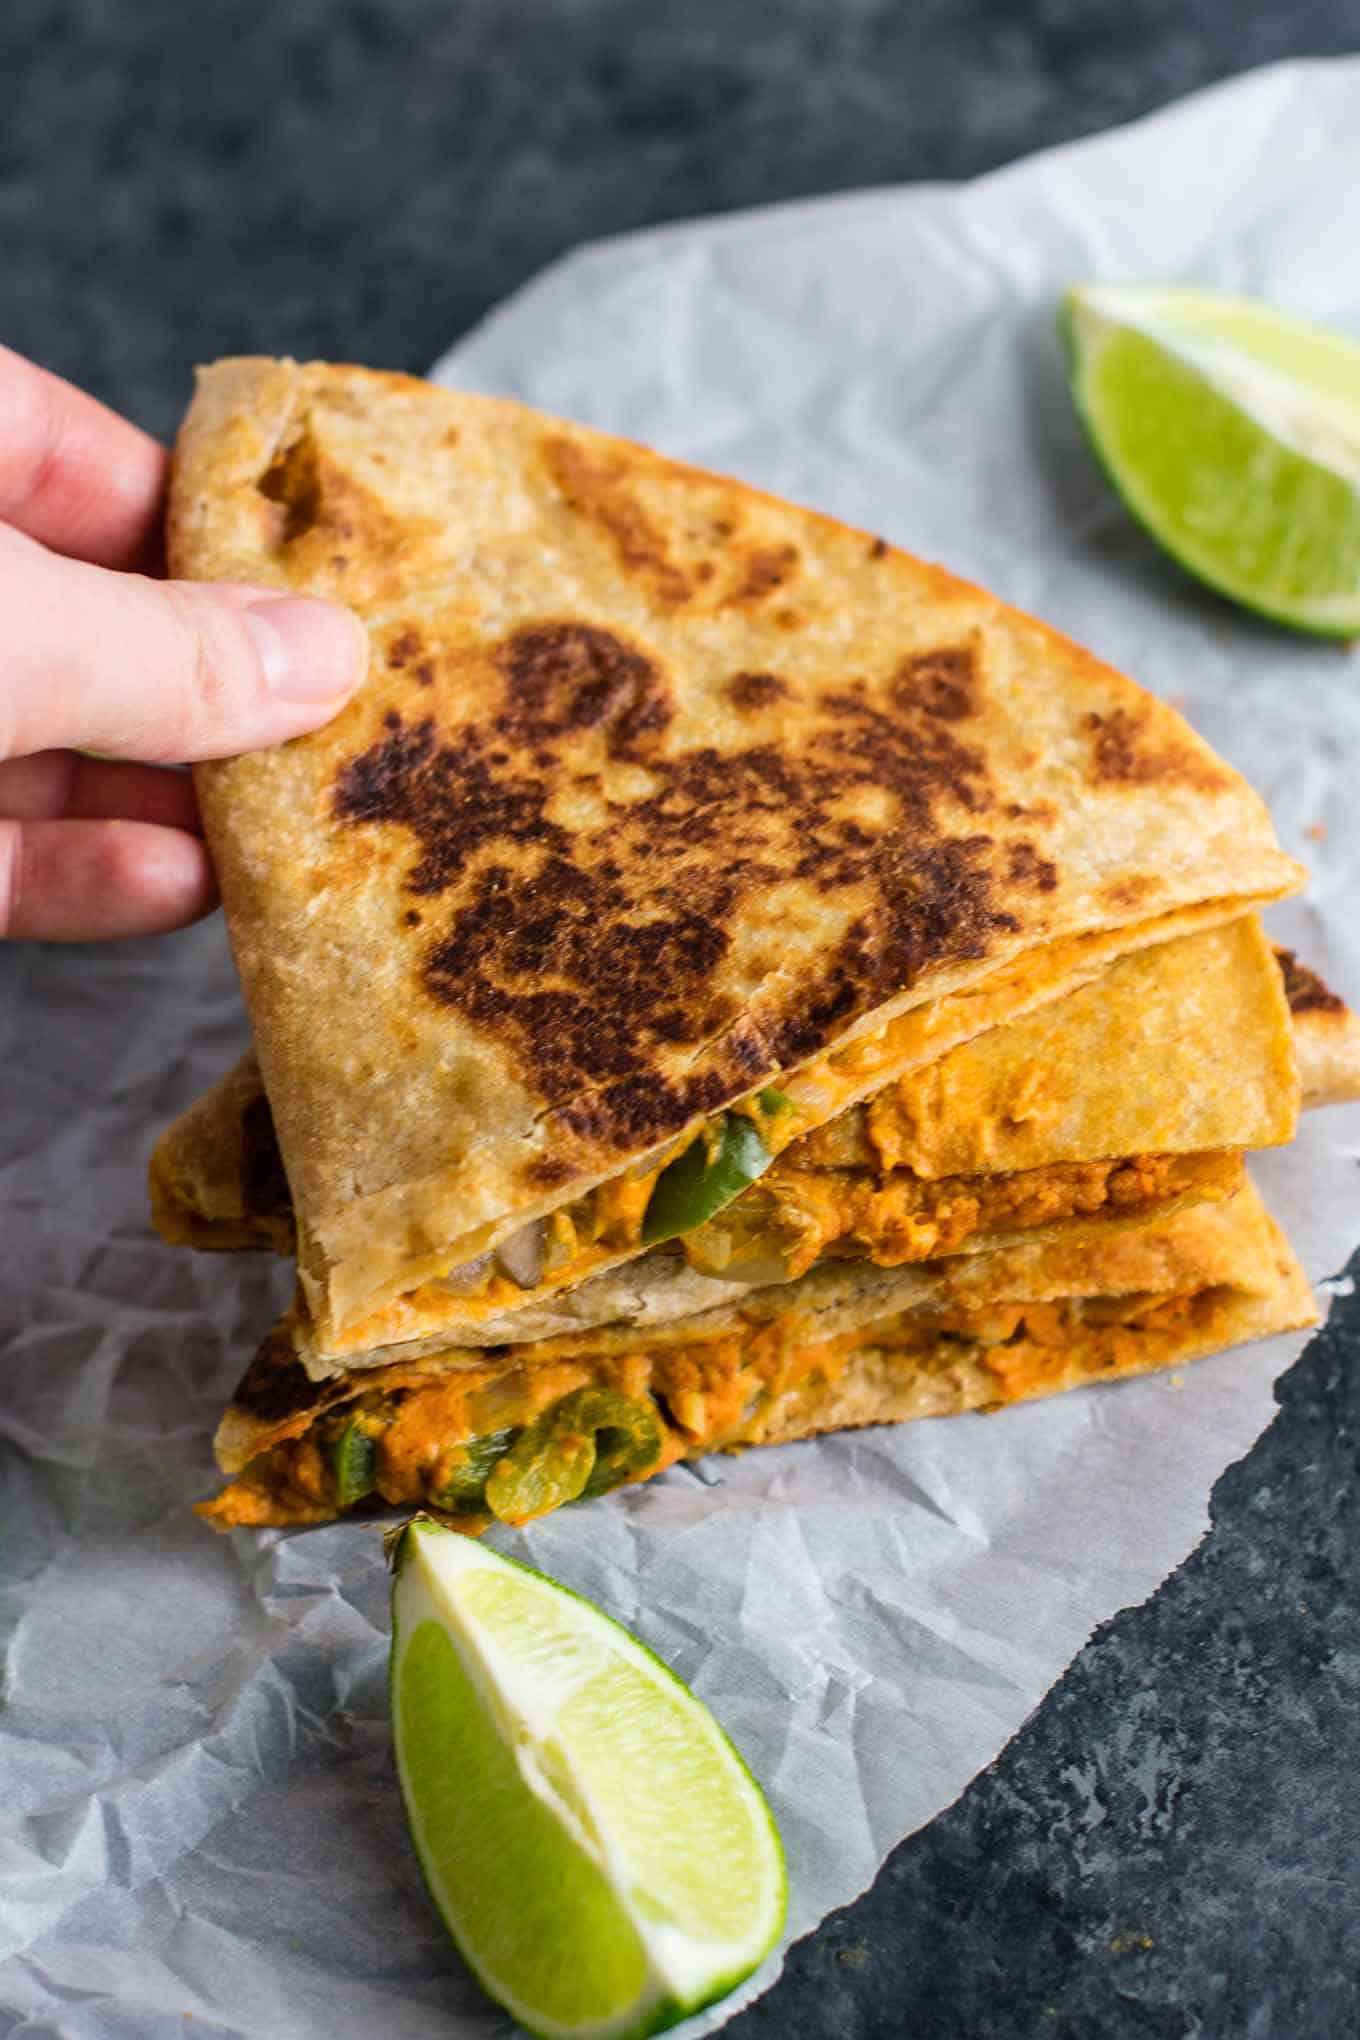 best vegan recipes - Easy vegan quesadillas recipe packed full of protein and flavor. No meat, no dairy, no vegan cheese! It's a Mexican favorite gone vegan! #vegan #quesadillas #meatless #veganmexican #veganquesadilla #dinner #recipes